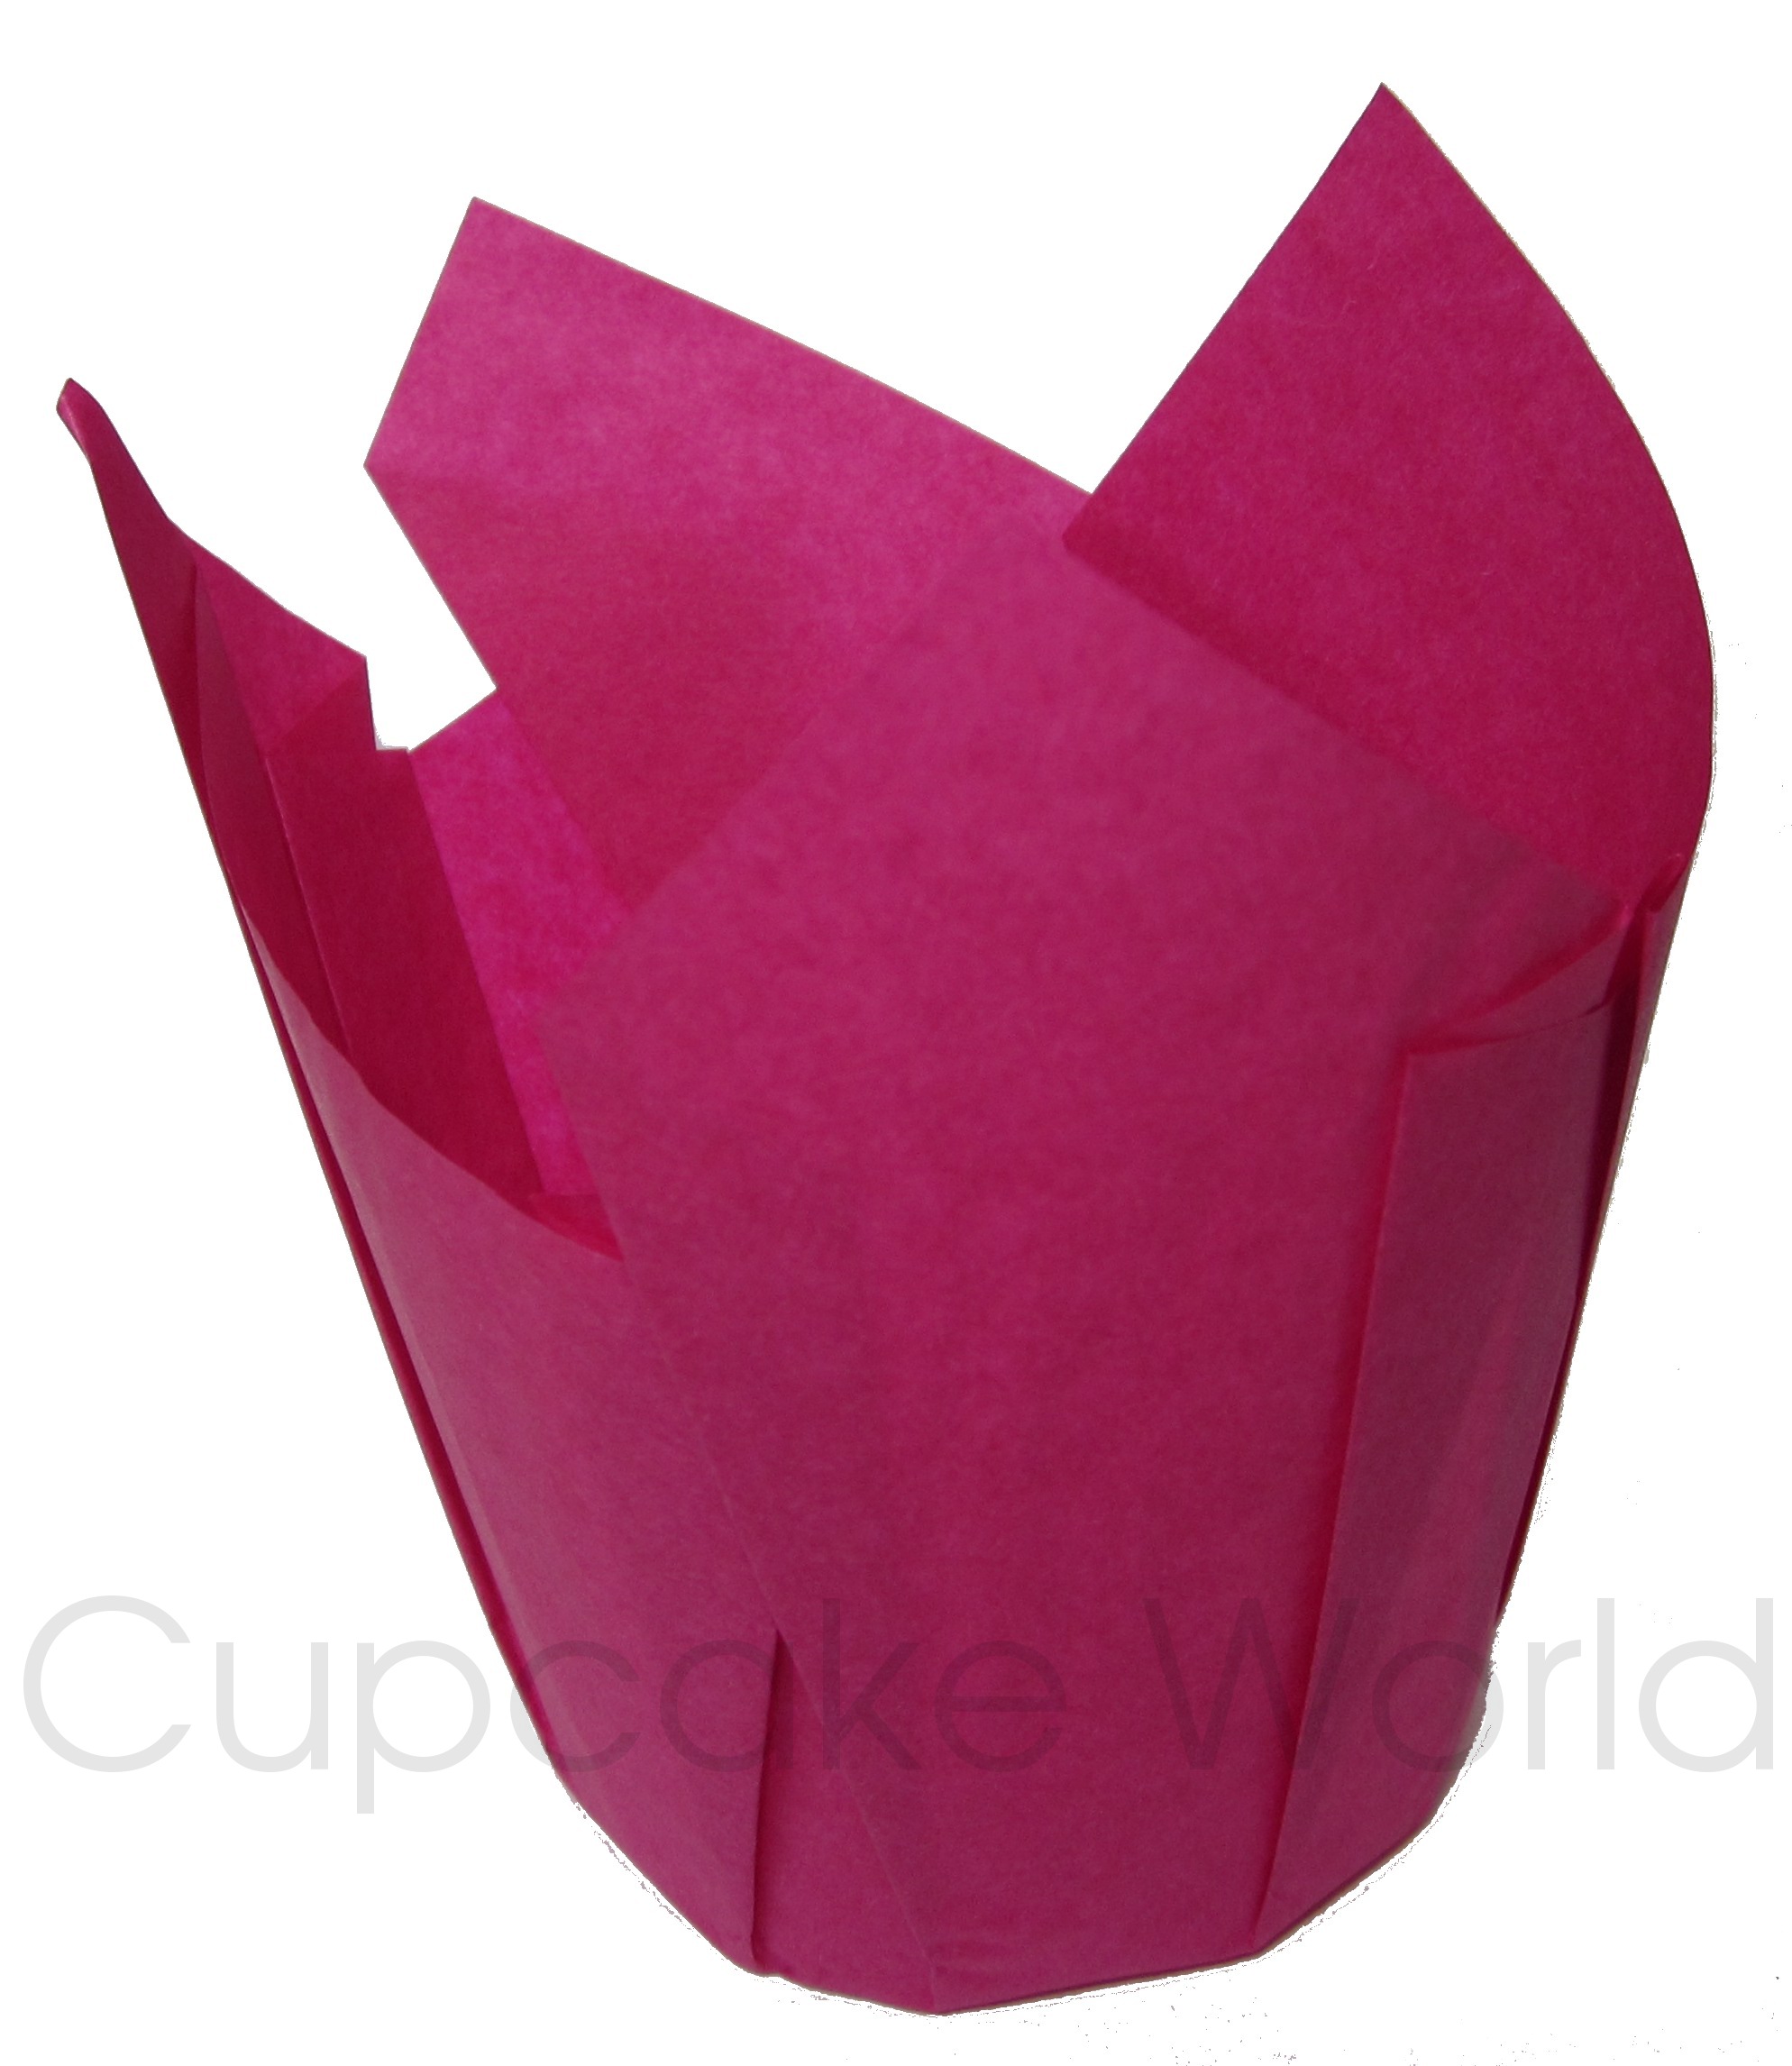 100PC CAFE STYLE HOT PINK PAPER CUPCAKE MUFFIN WRAPS STANDARD